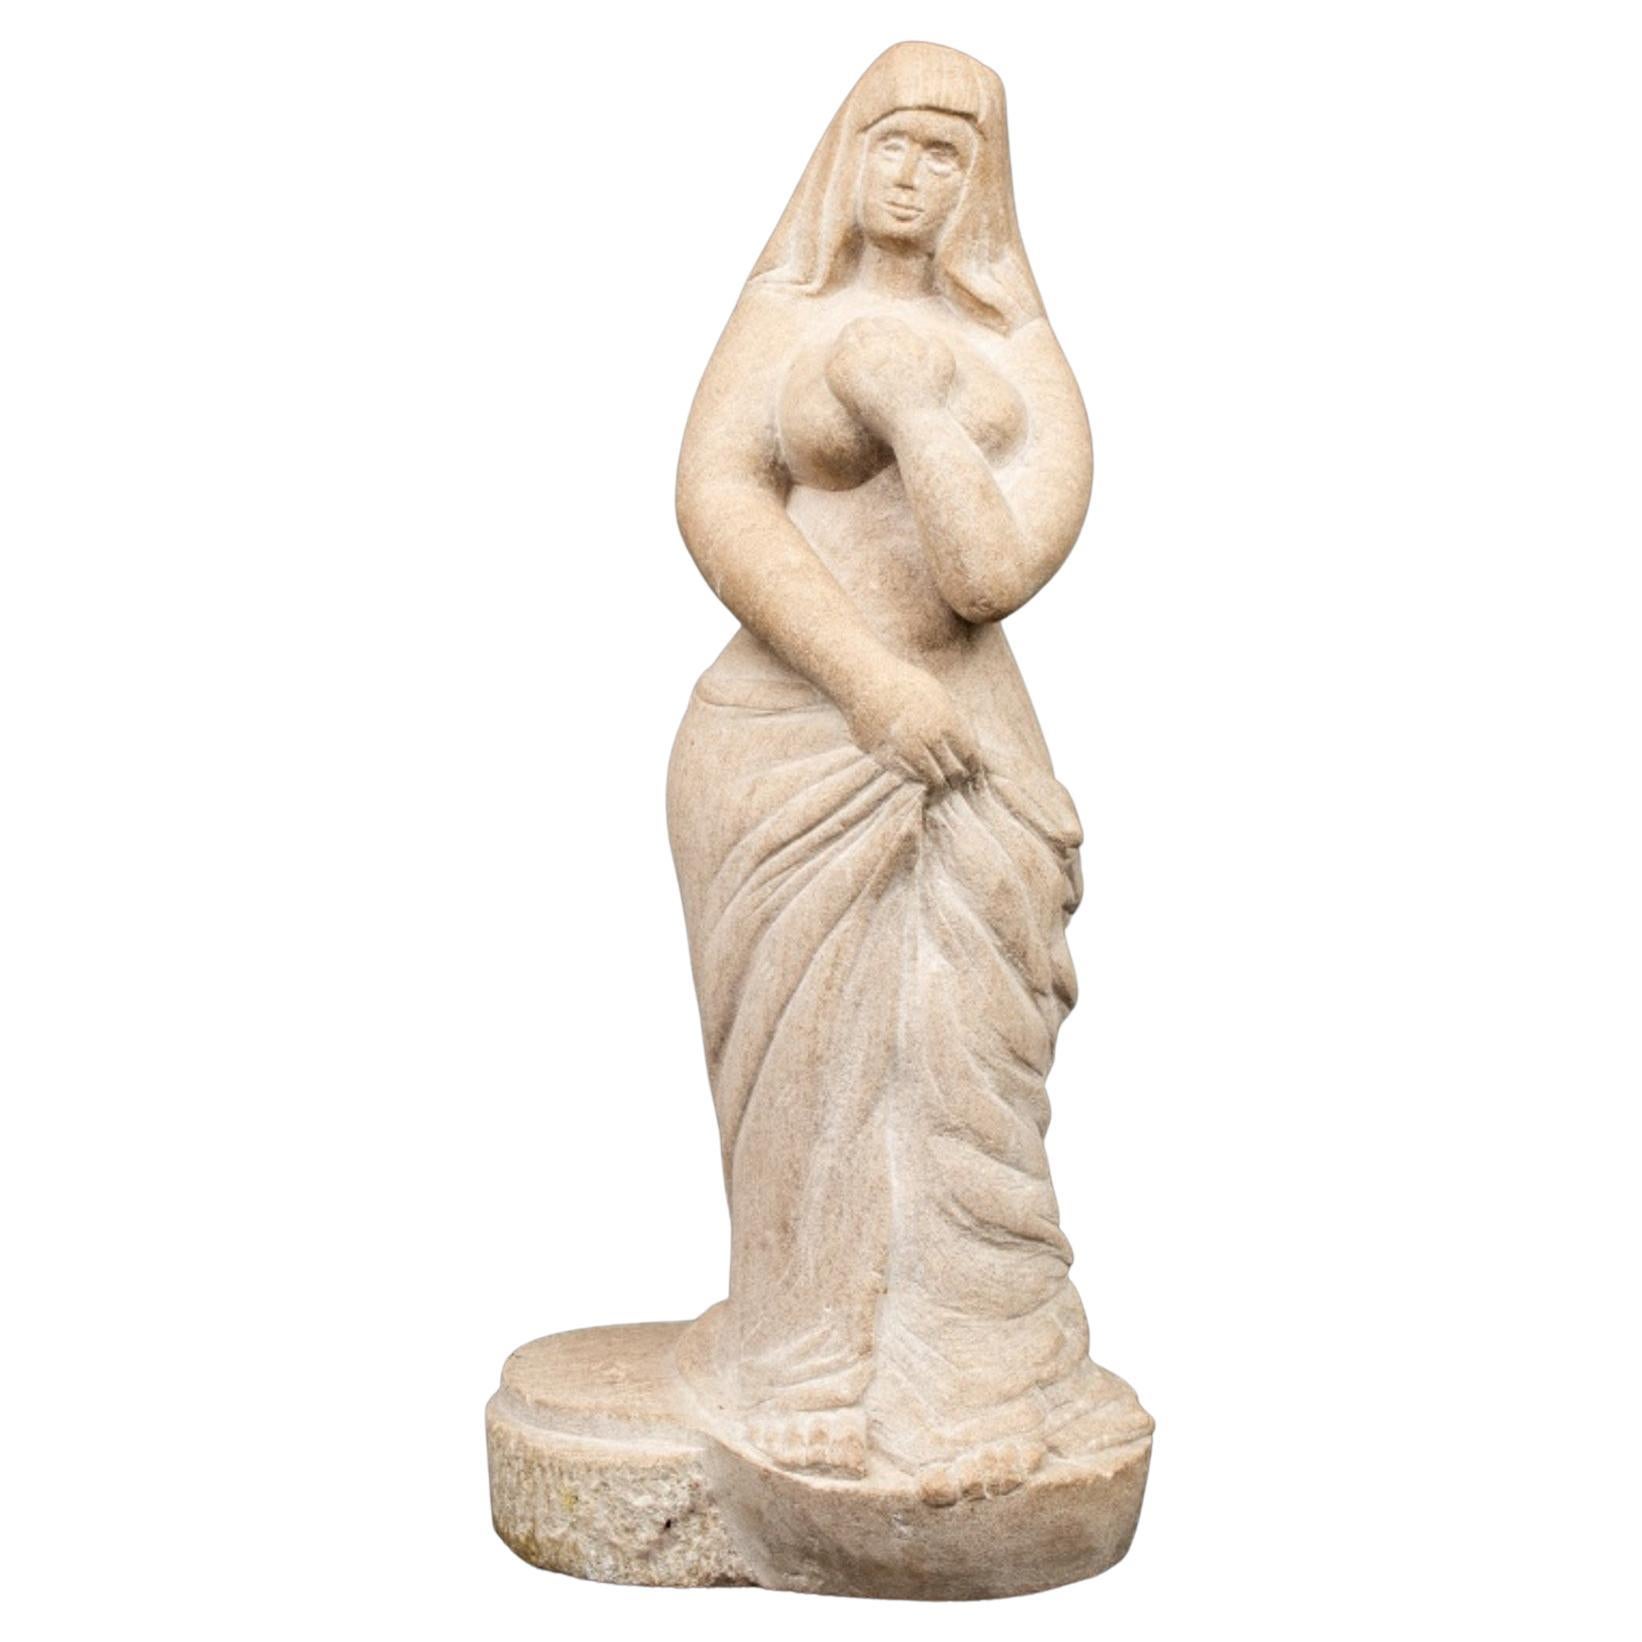 J. Todak Carved Stone Model of a Woman